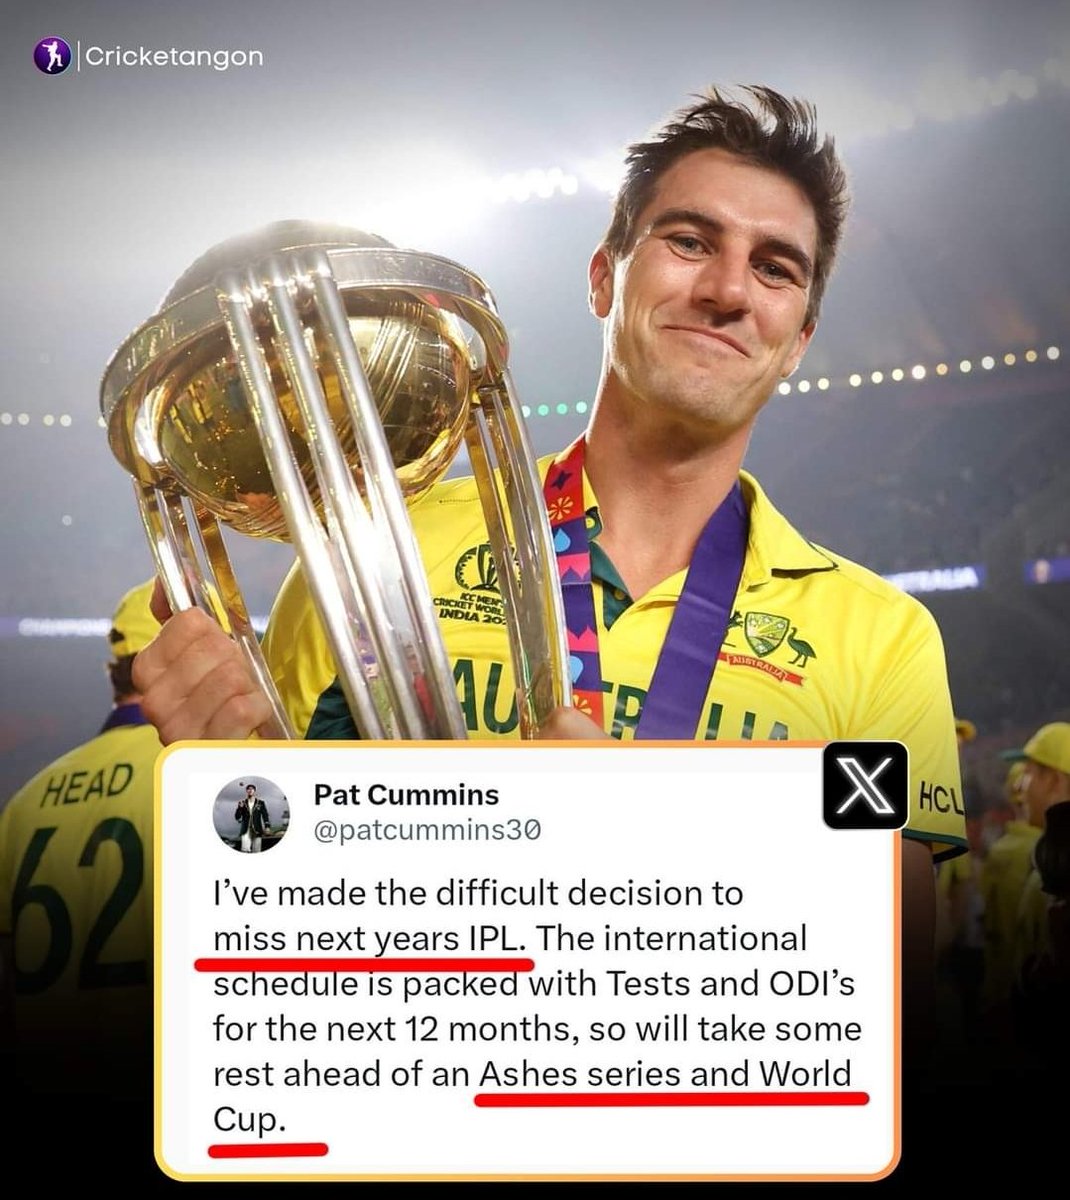 He deliberately missed IPL to focus on the Cricket World Cup 2023 & Ashes series. Priorities are well sorted for this guy. #CWC23 #Ashes @CricketAustrala